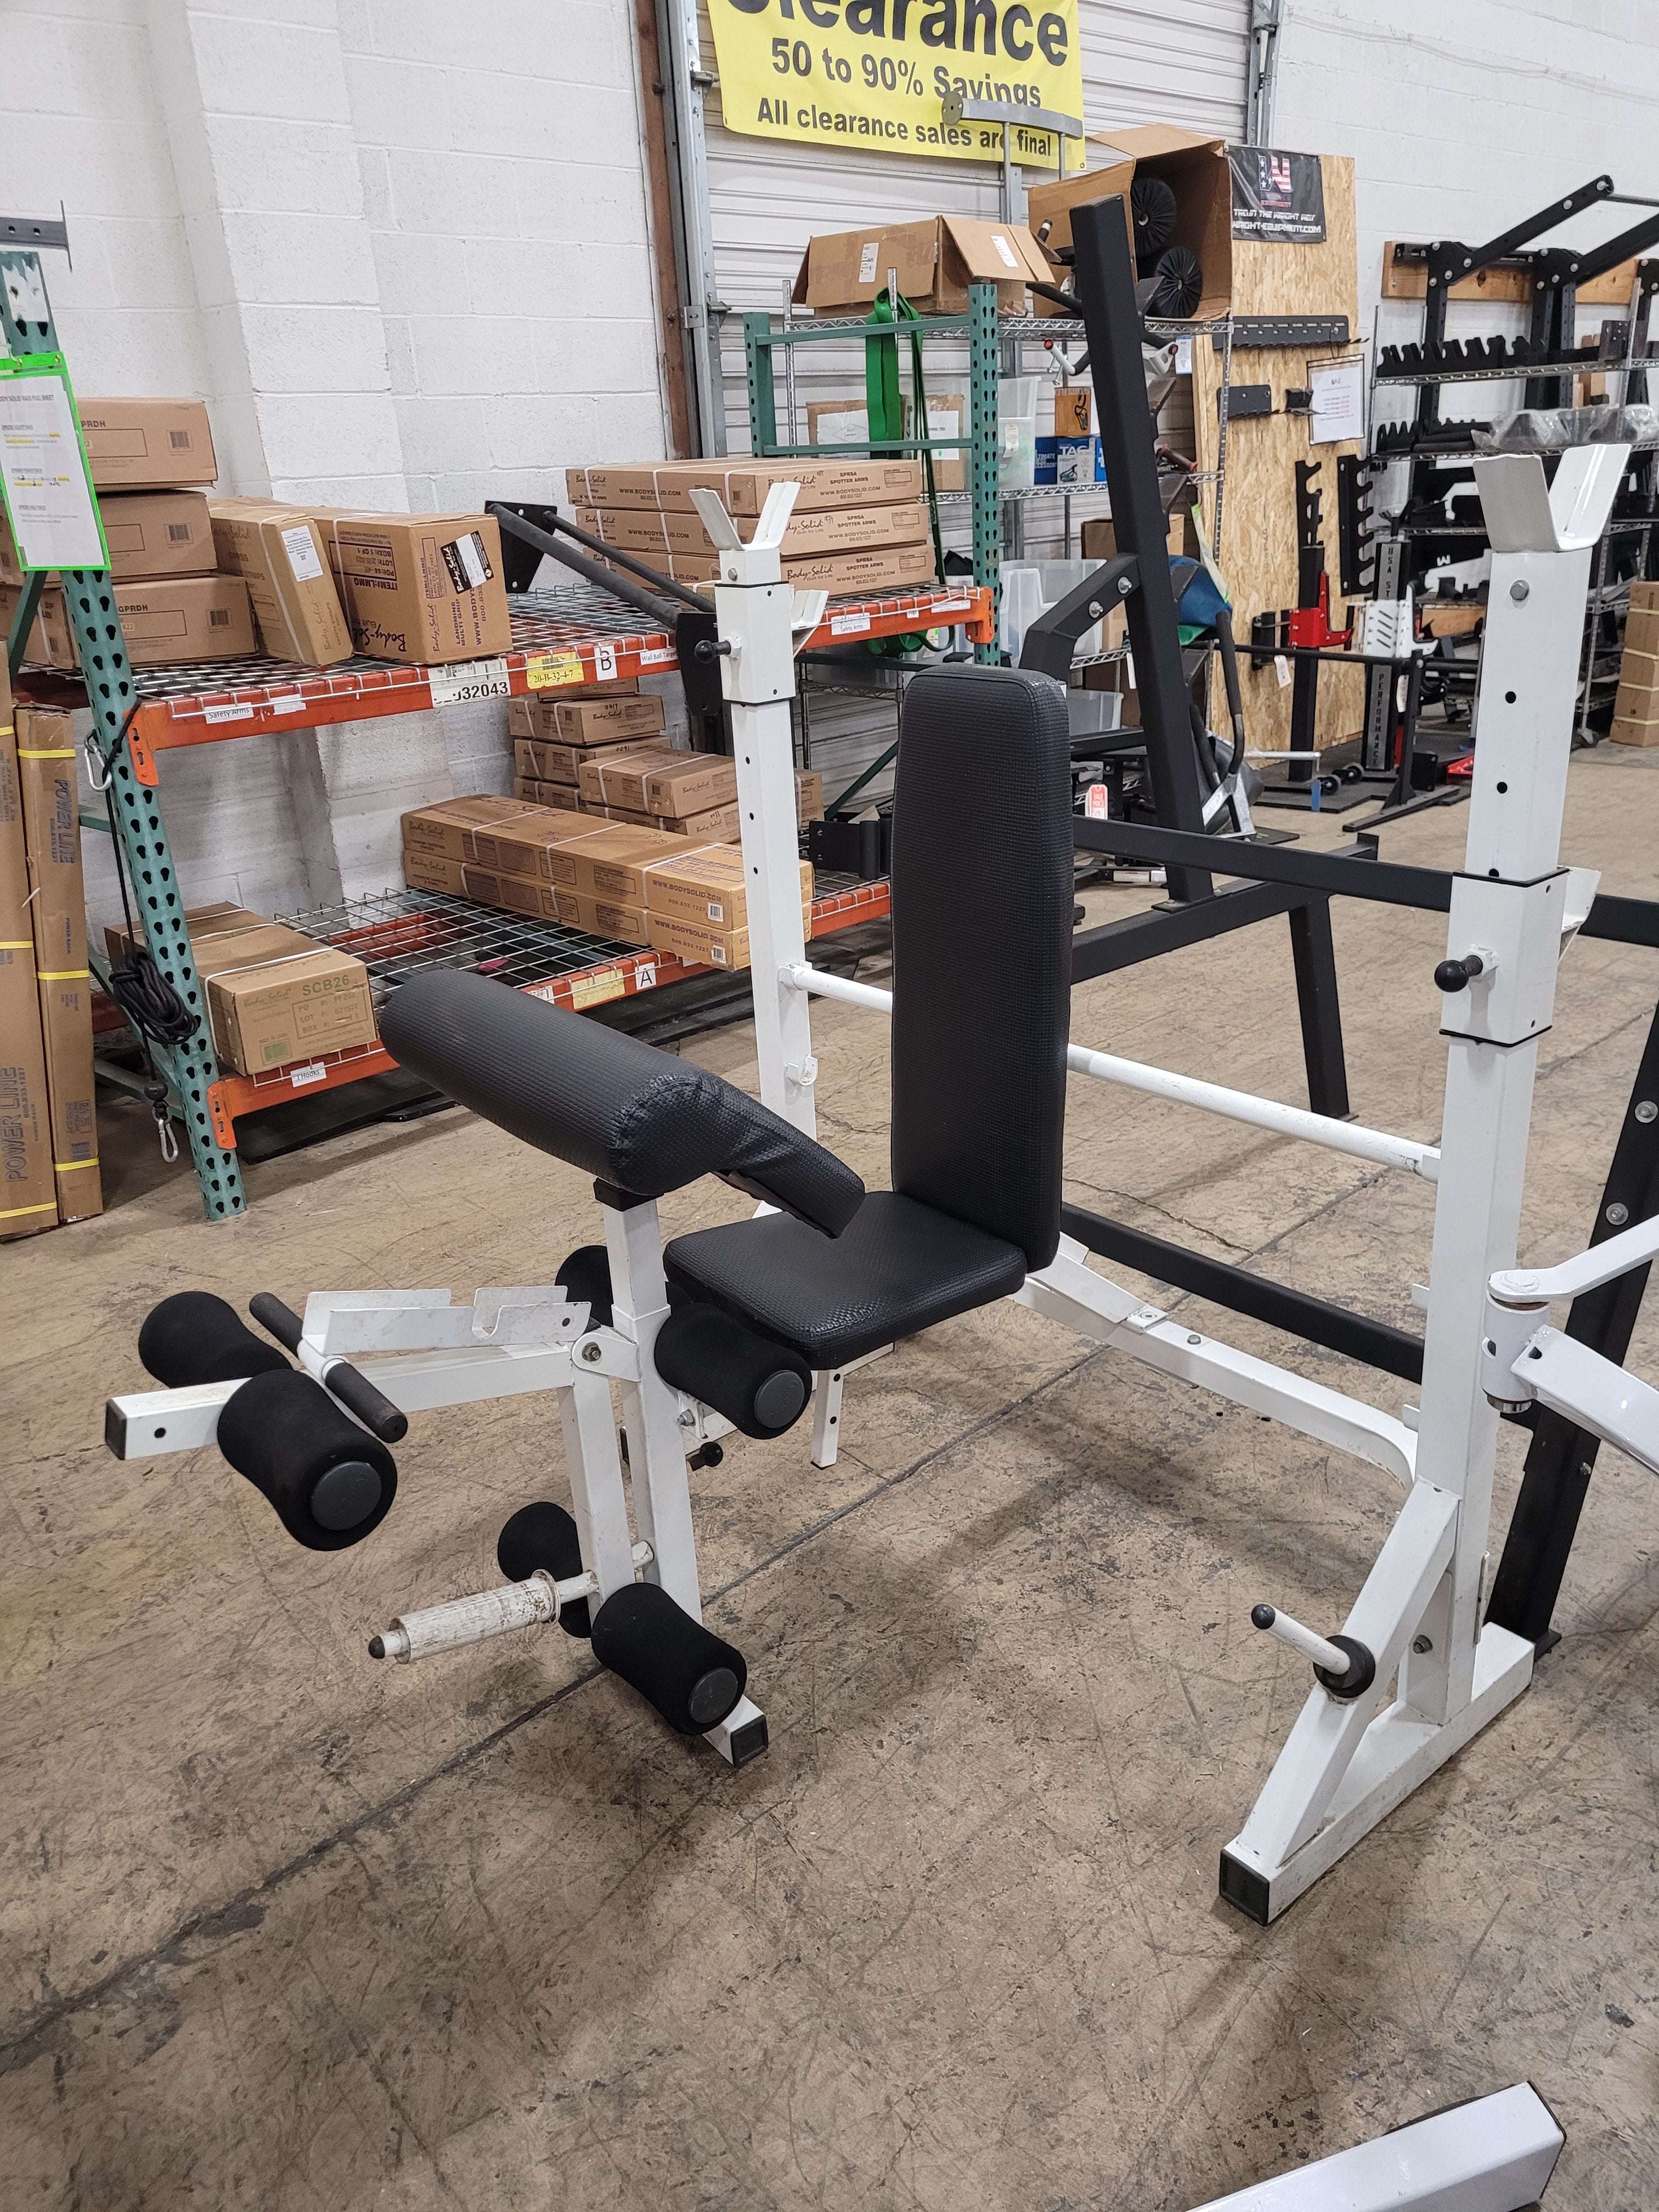 Show Me Weights, Adjustable Bench with Uprights, Preacher Curl and Leg Ext Attachments - Used